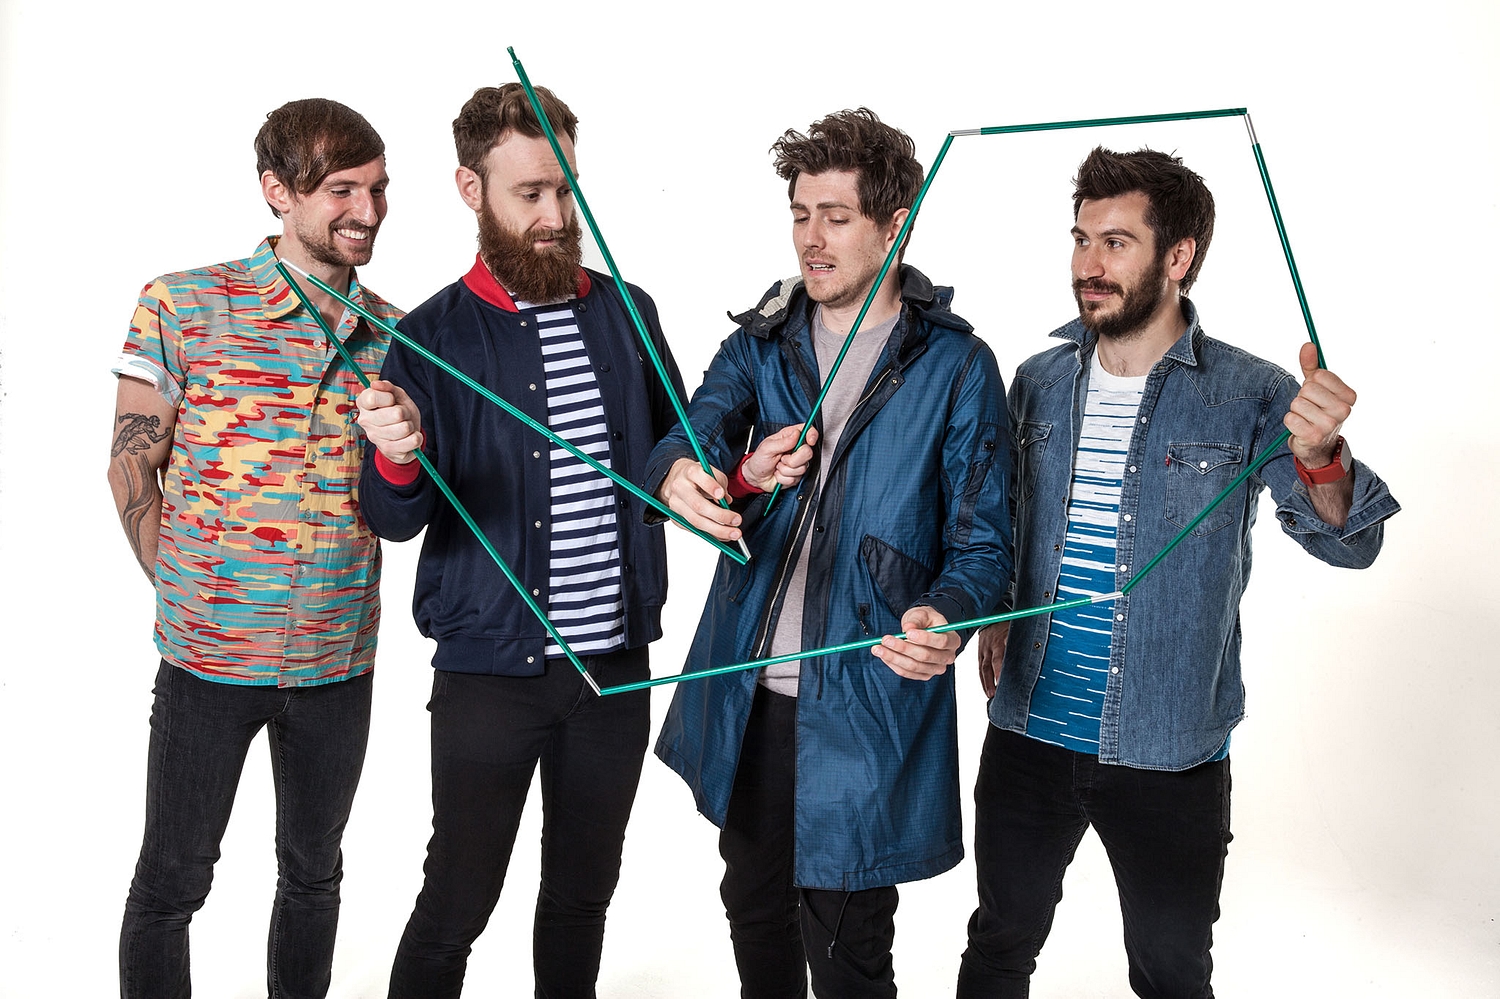 Twin Atlantic: "Rock music can be taken too seriously"